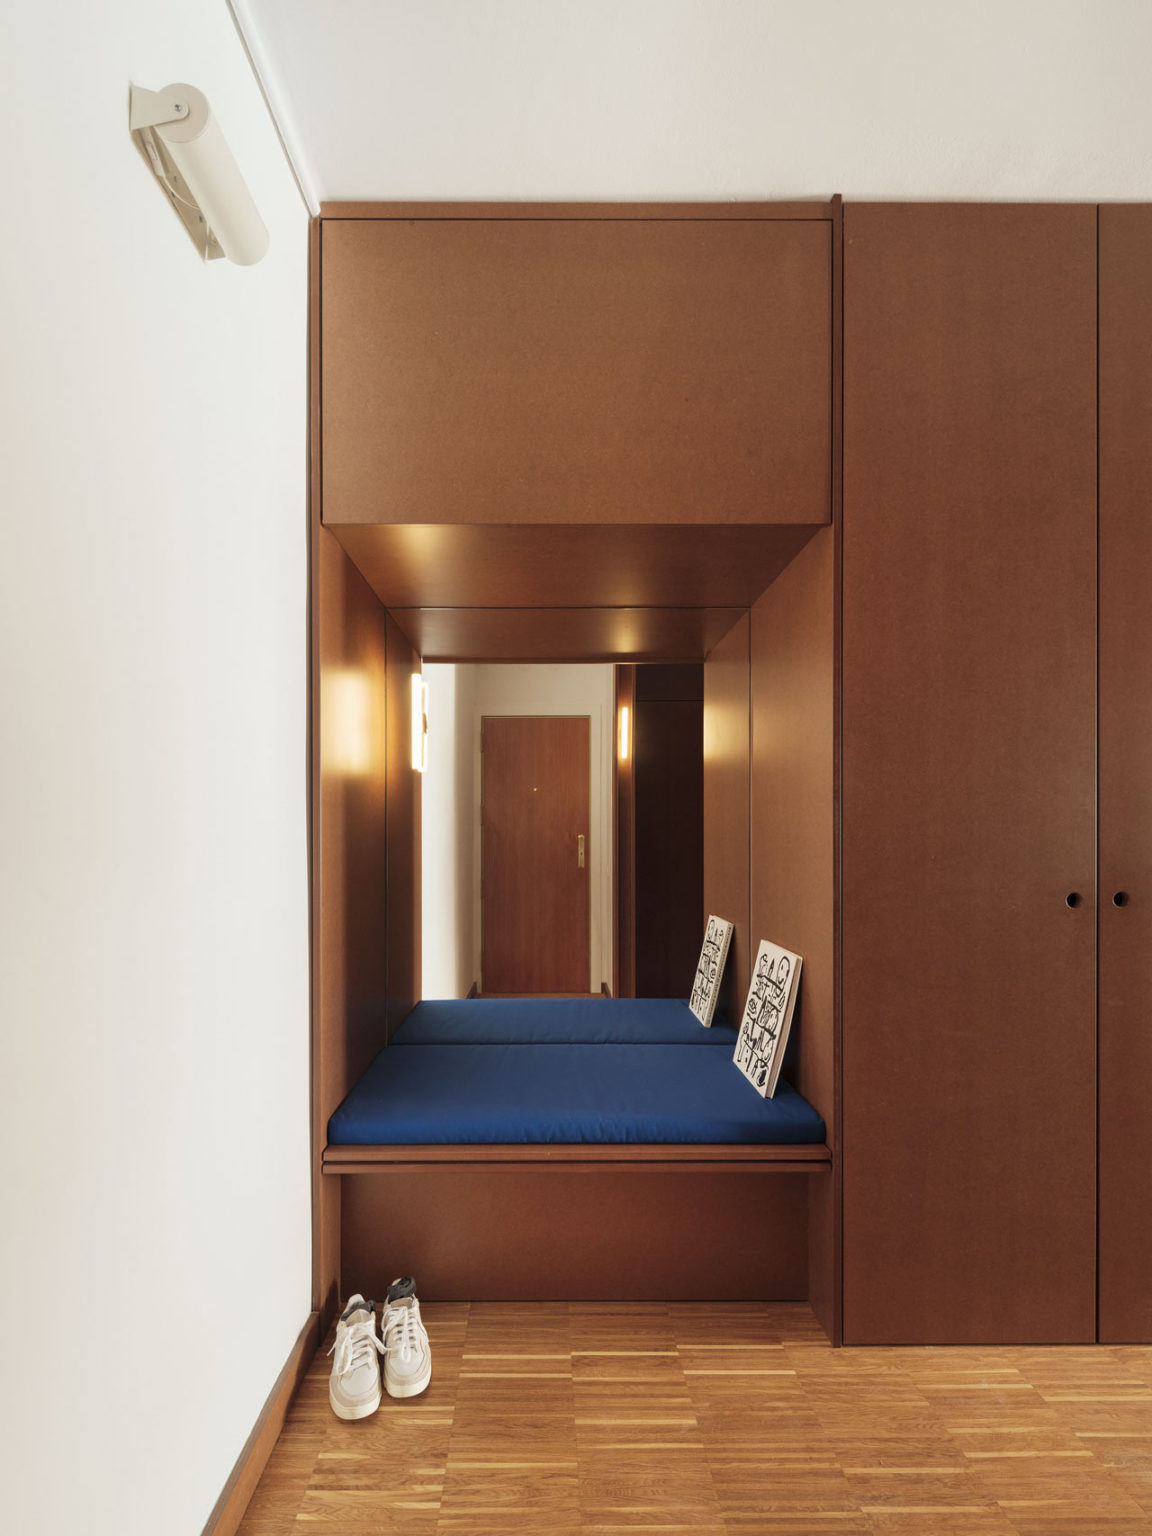 The entryway features a lot of storage space and a built in seat with a mirror